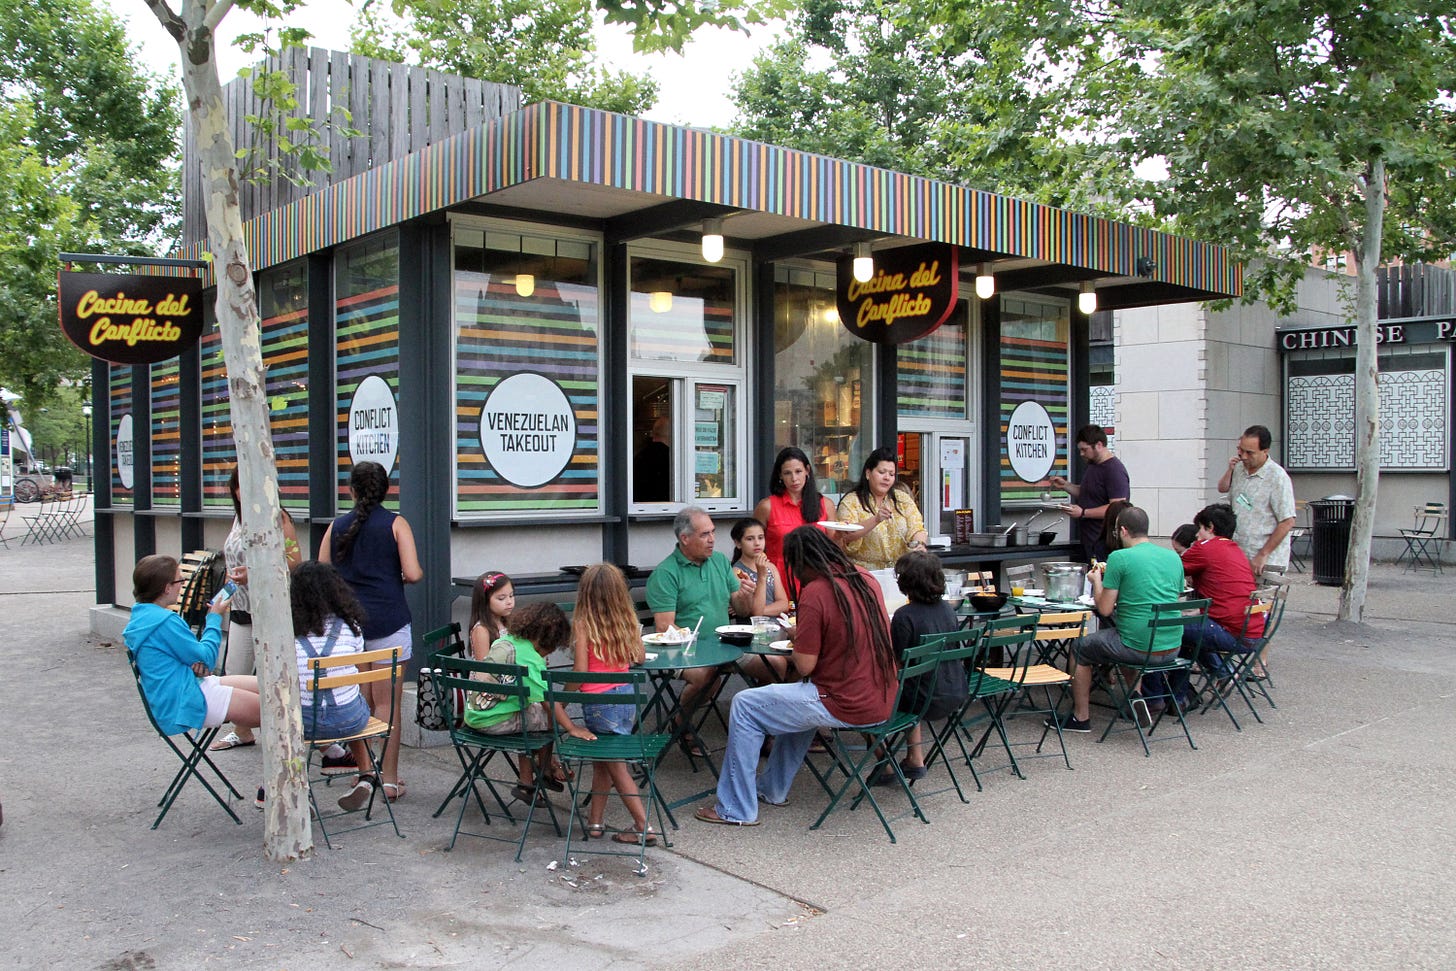 Diners sit at outdoor tables around the small "Cocina del Conflicto," in its incarnation serving Venezuelan cuisine.